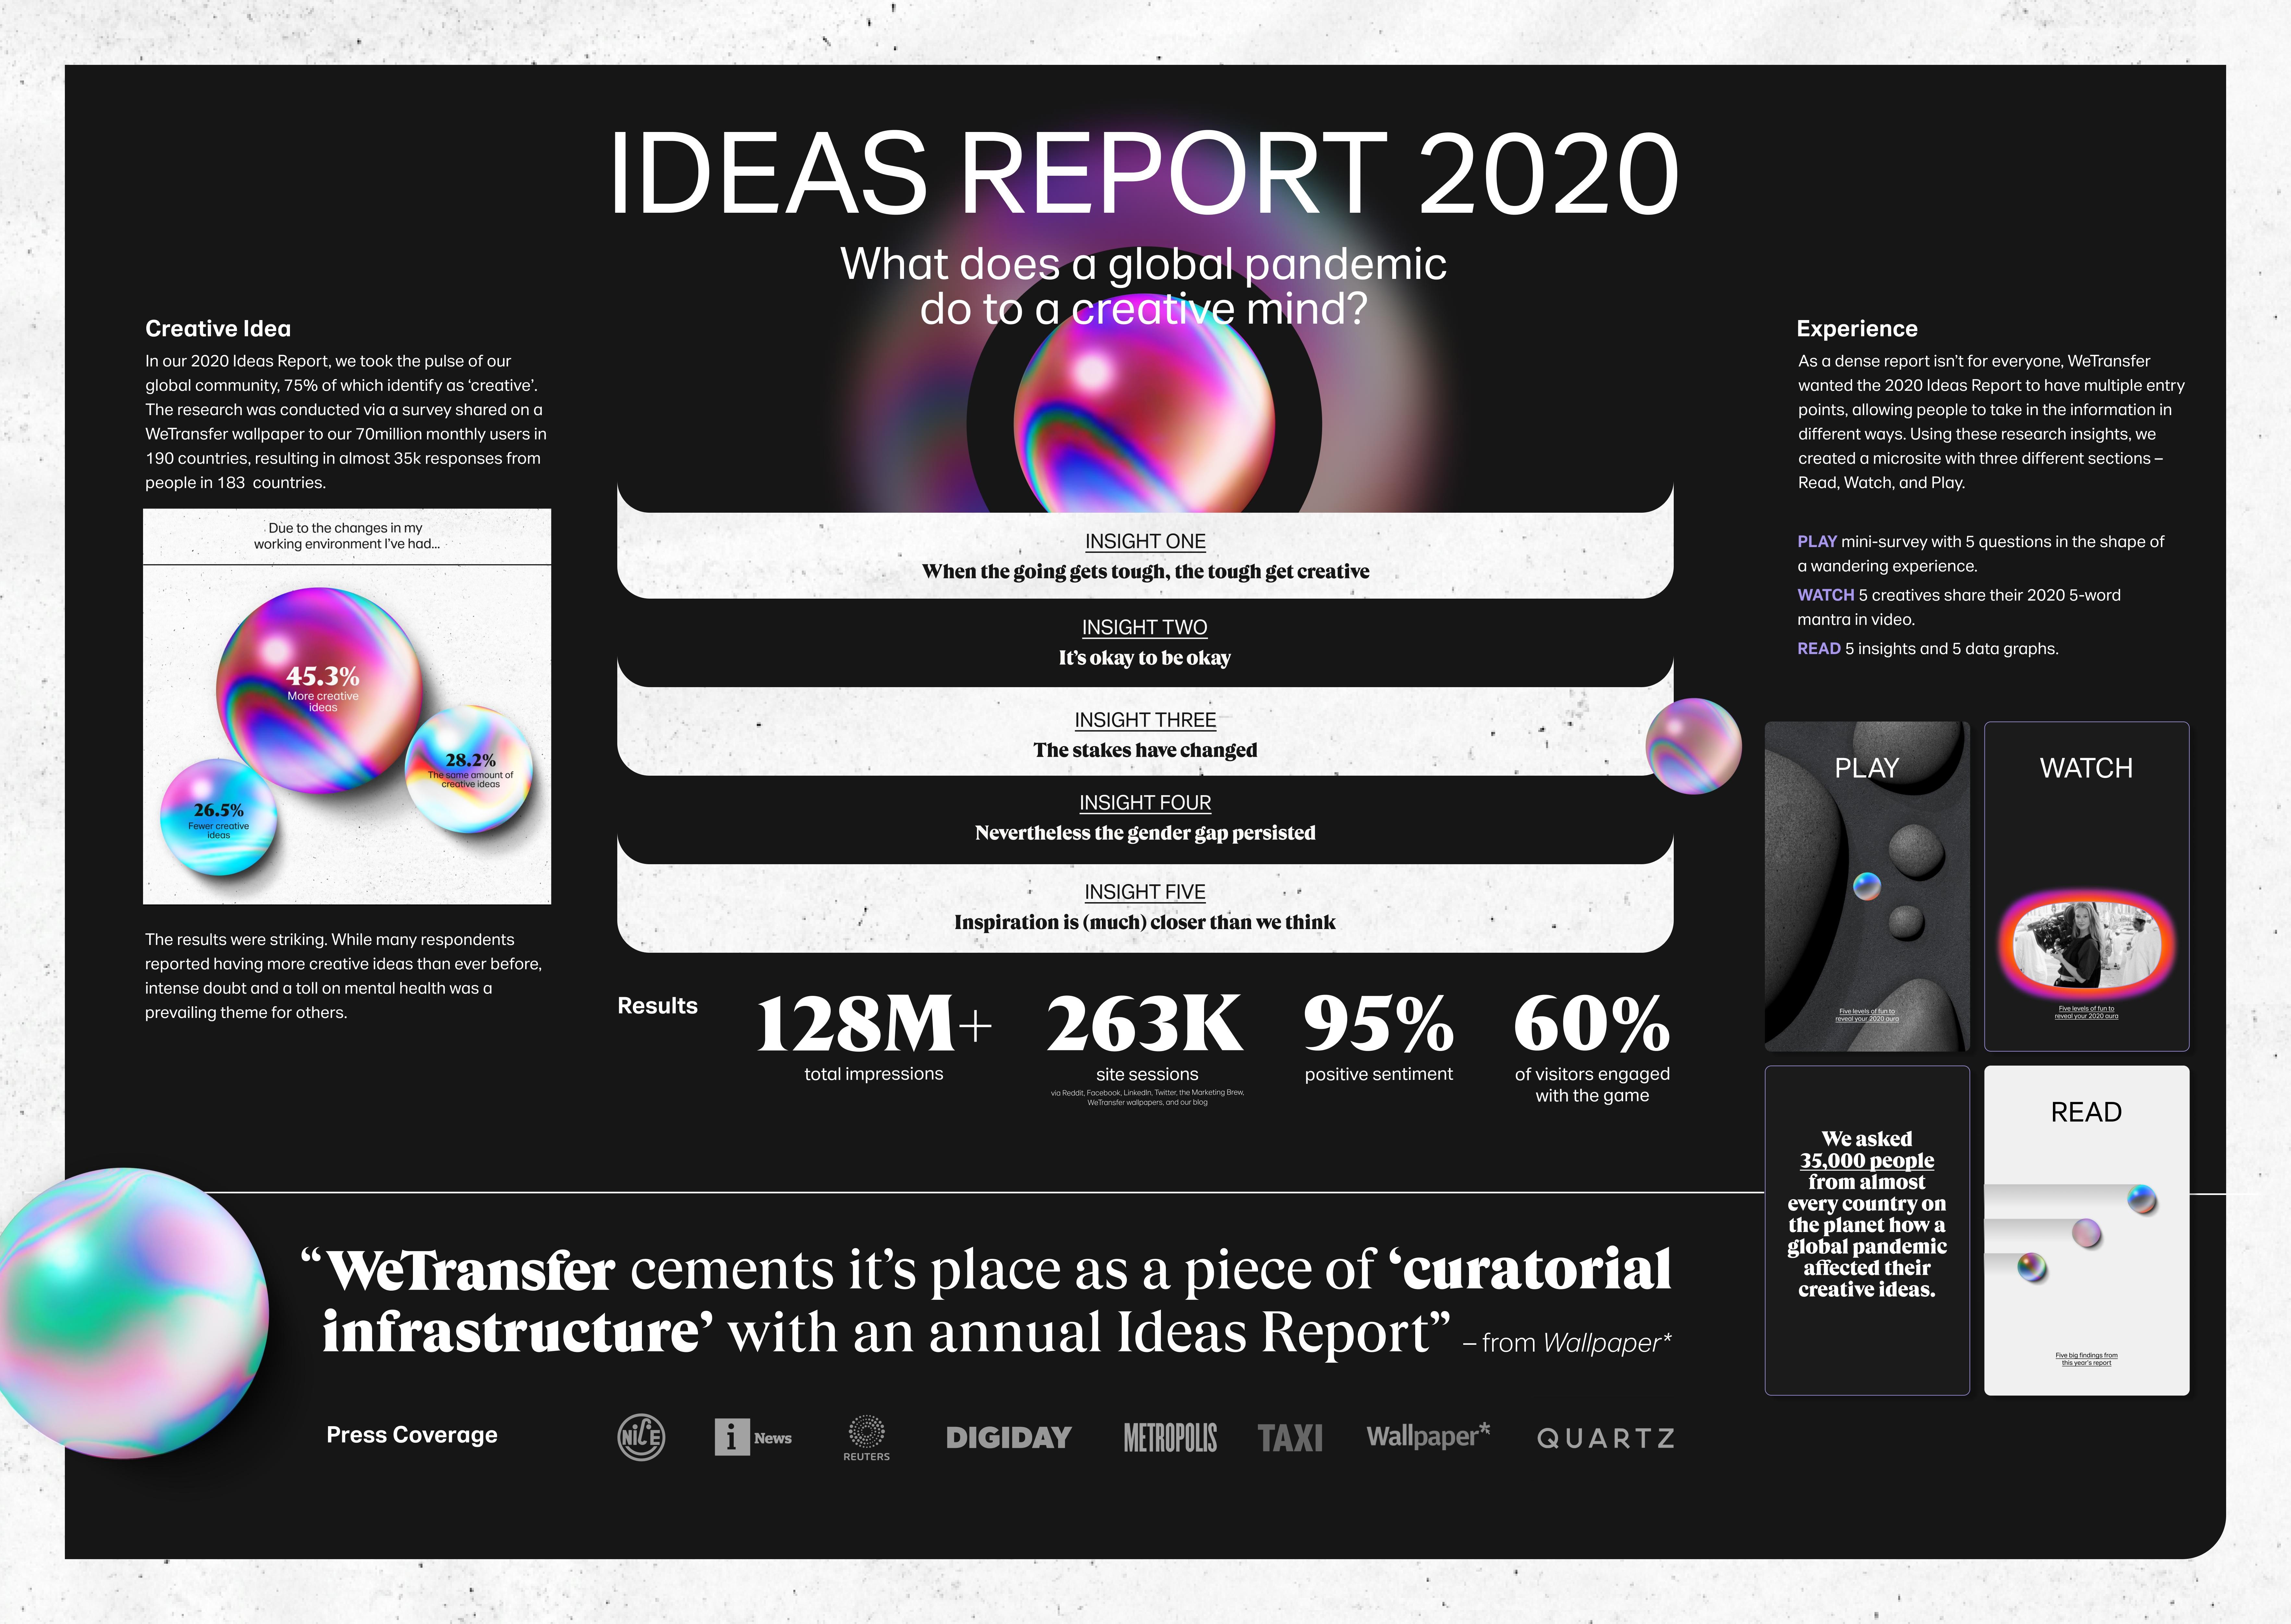 THE IDEAS REPORT 2020